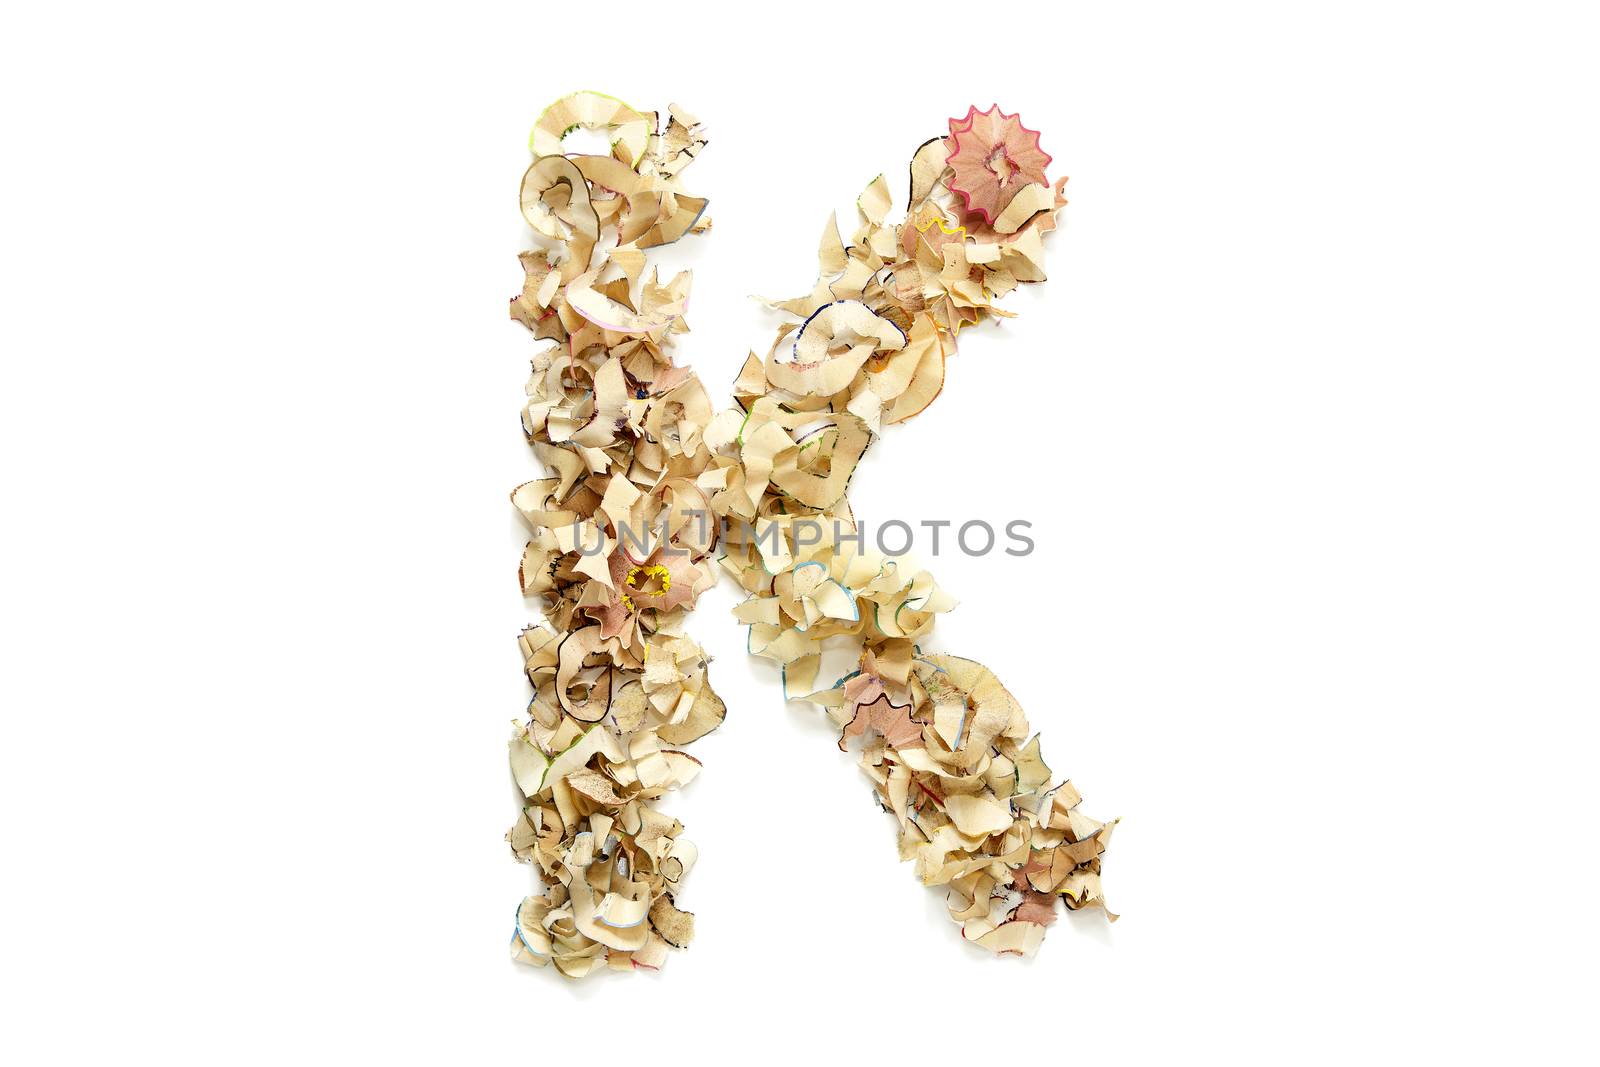 Letter K made from coloured pencil shavings for use in your design.